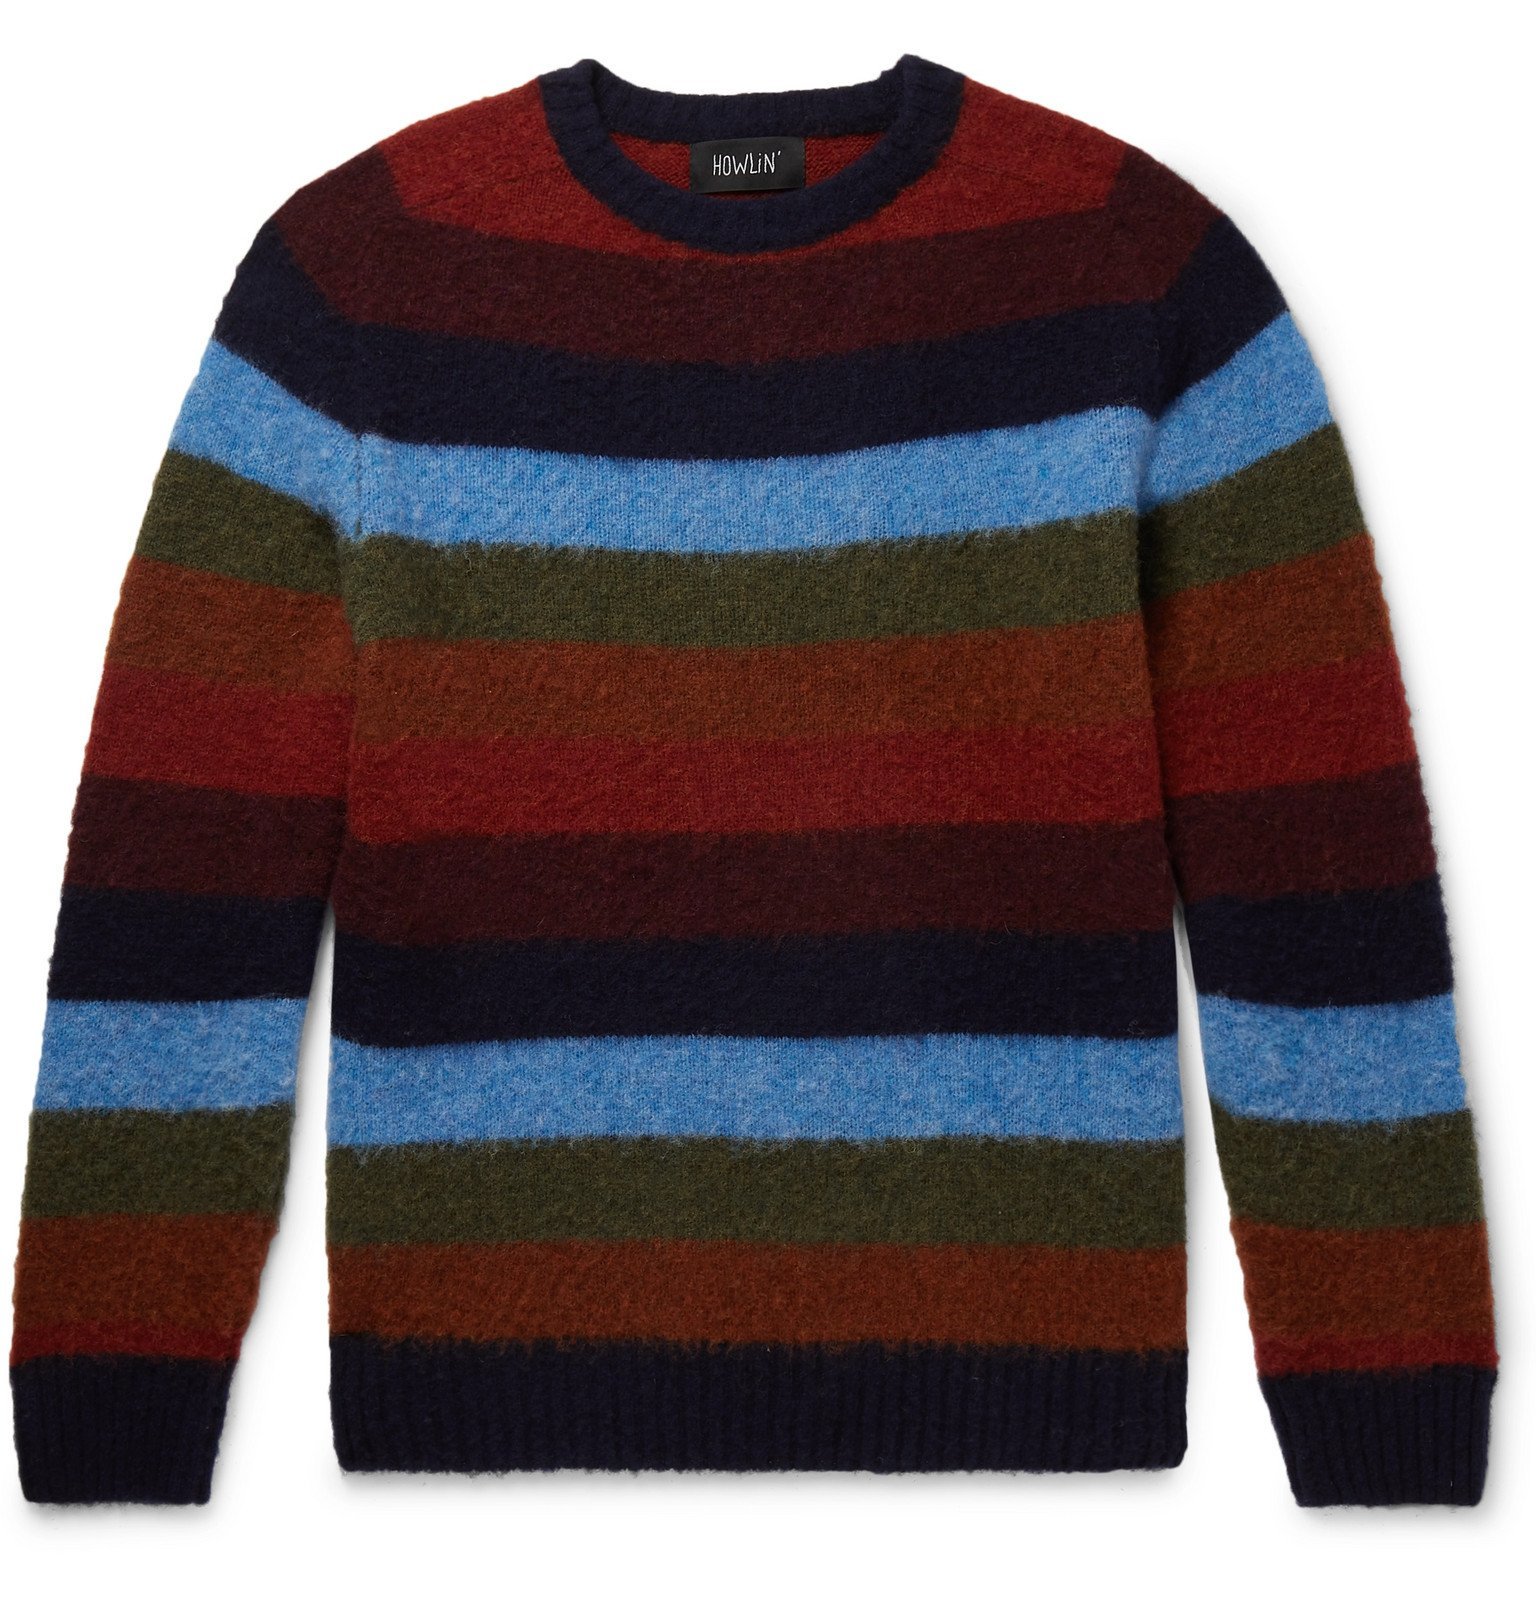 Howlin' - Striped Brushed-Wool Sweater - Blue Howlin' by Morrison